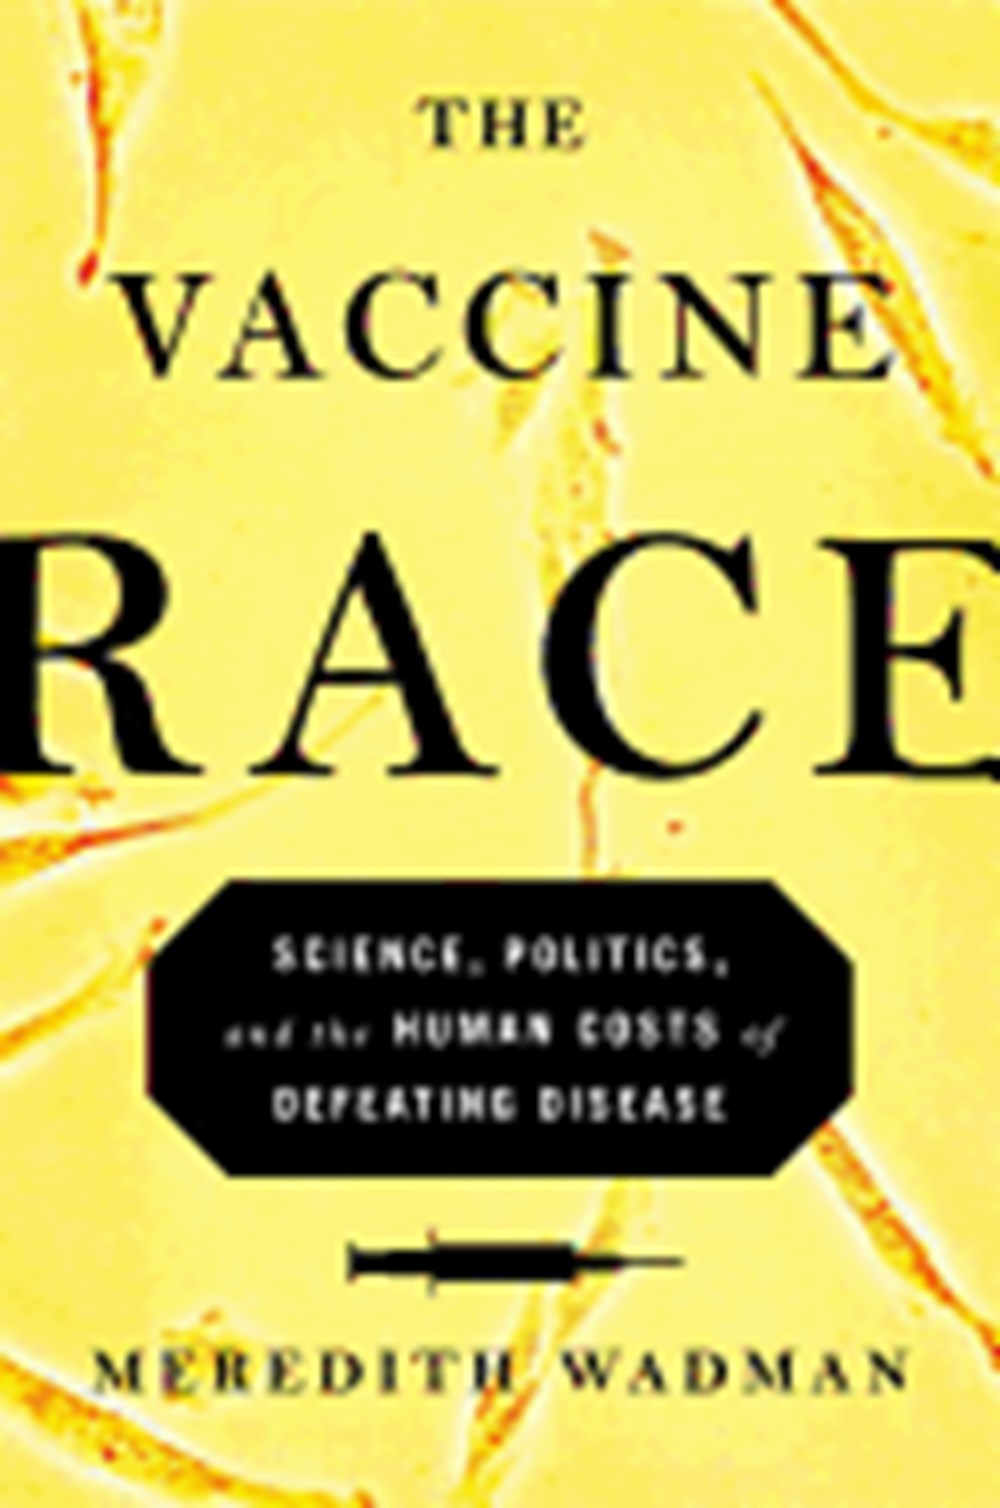 Vaccine Race: Science, Politics, and the Human Costs of Defeating Disease